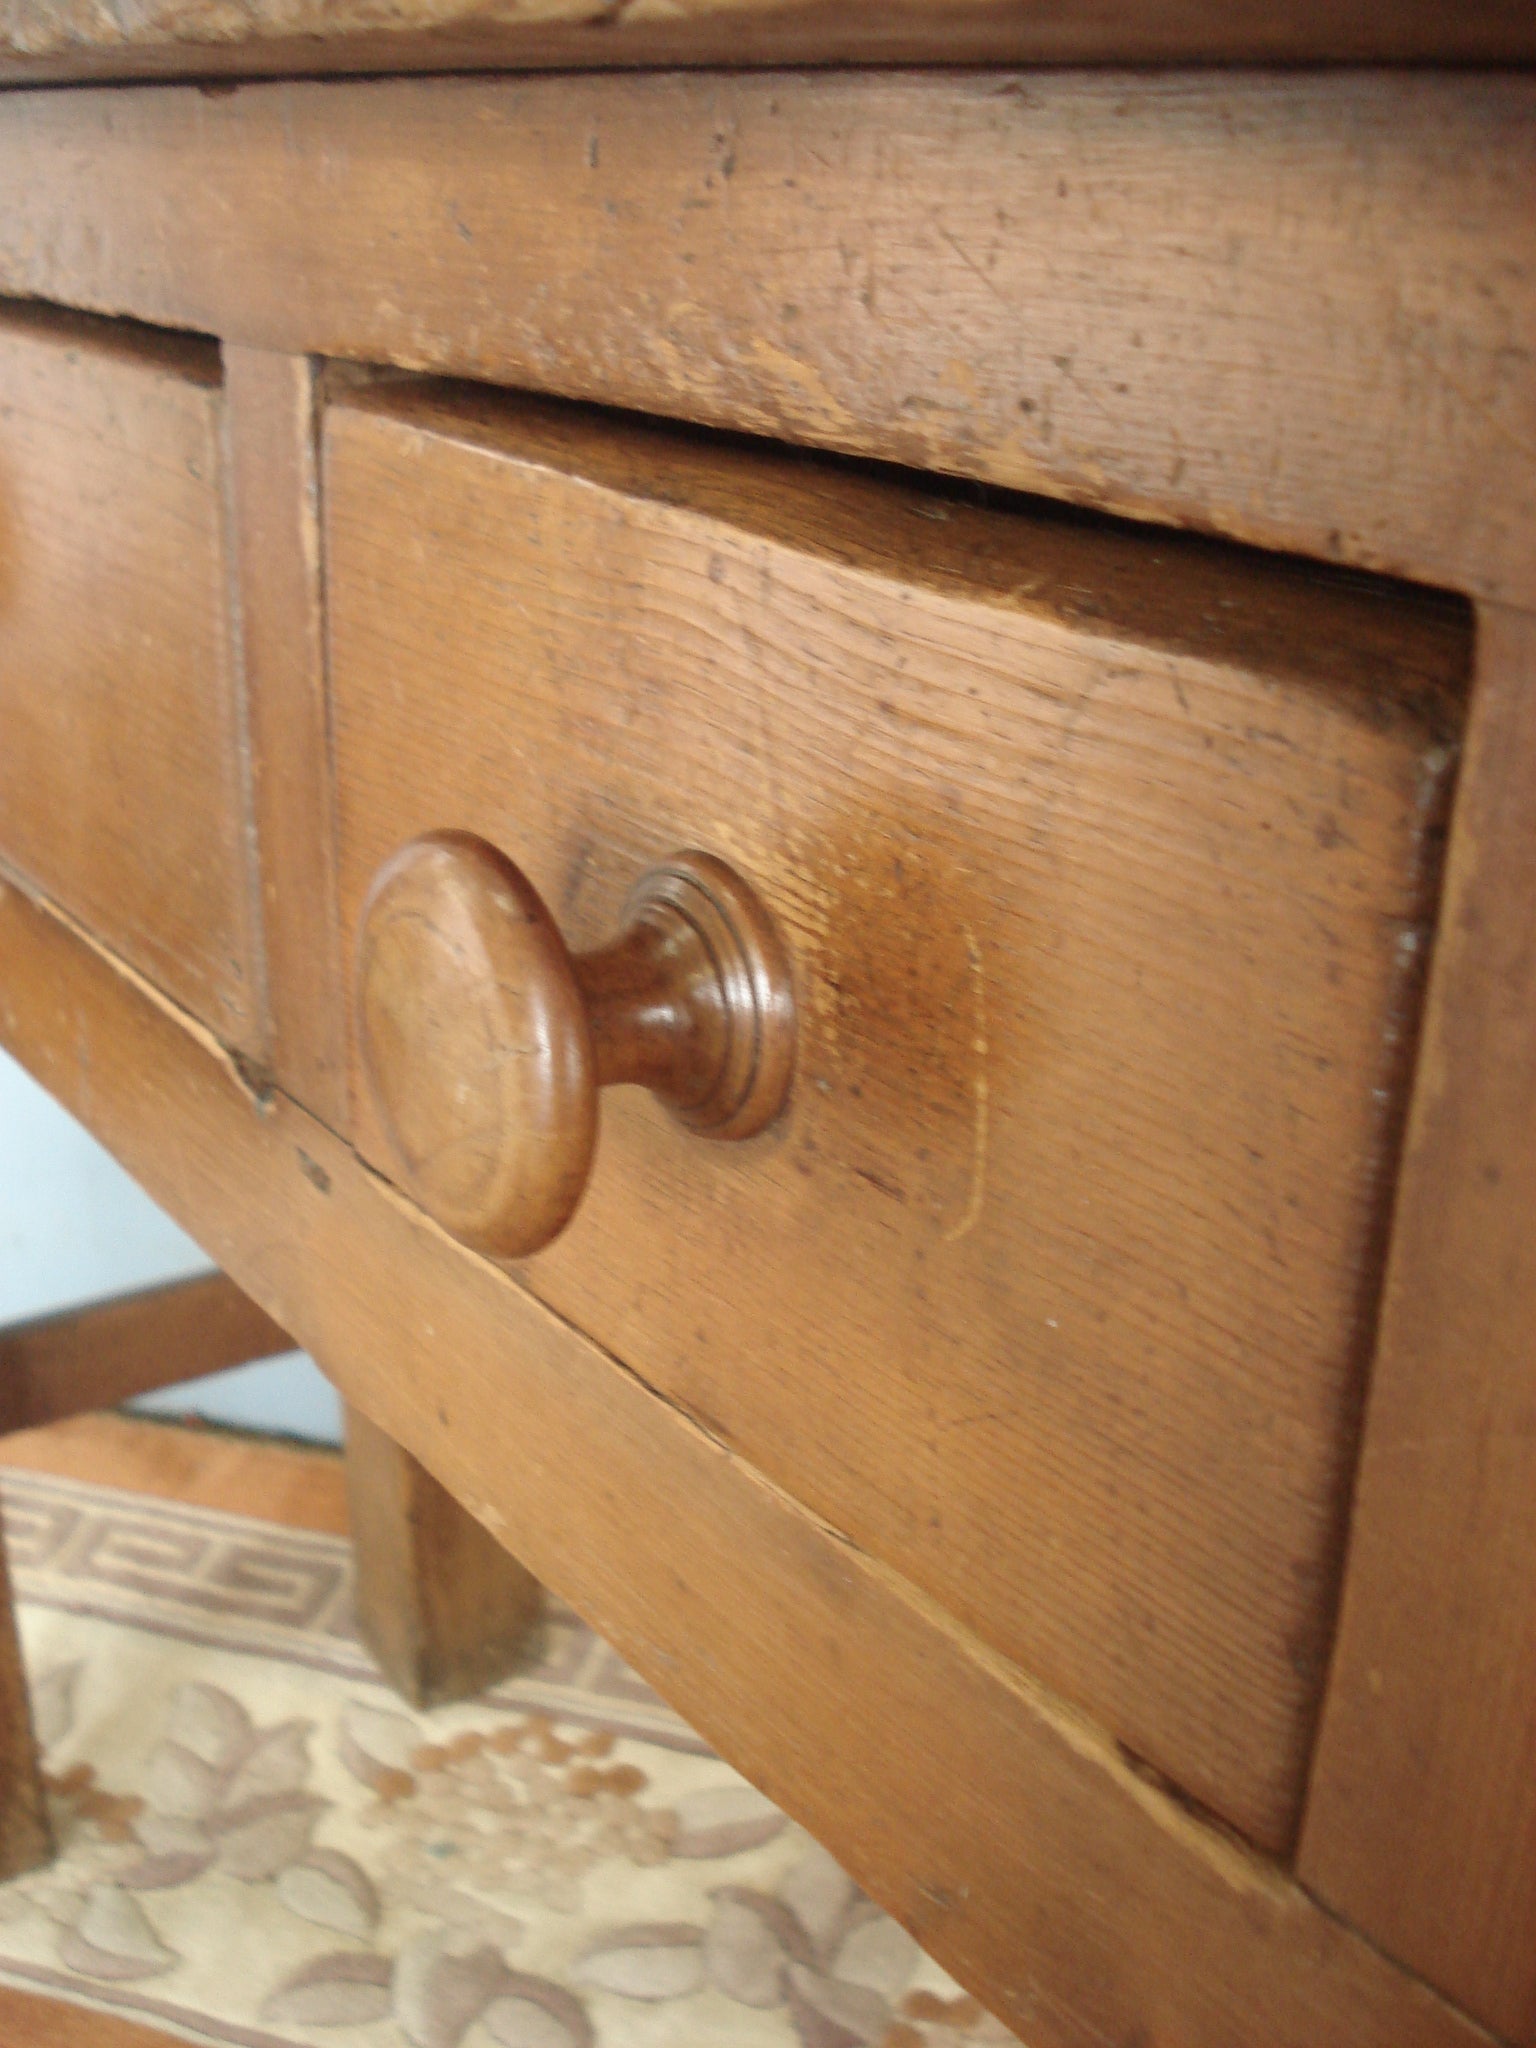 In its original finish:  A shallow 19th century dresser base / console table